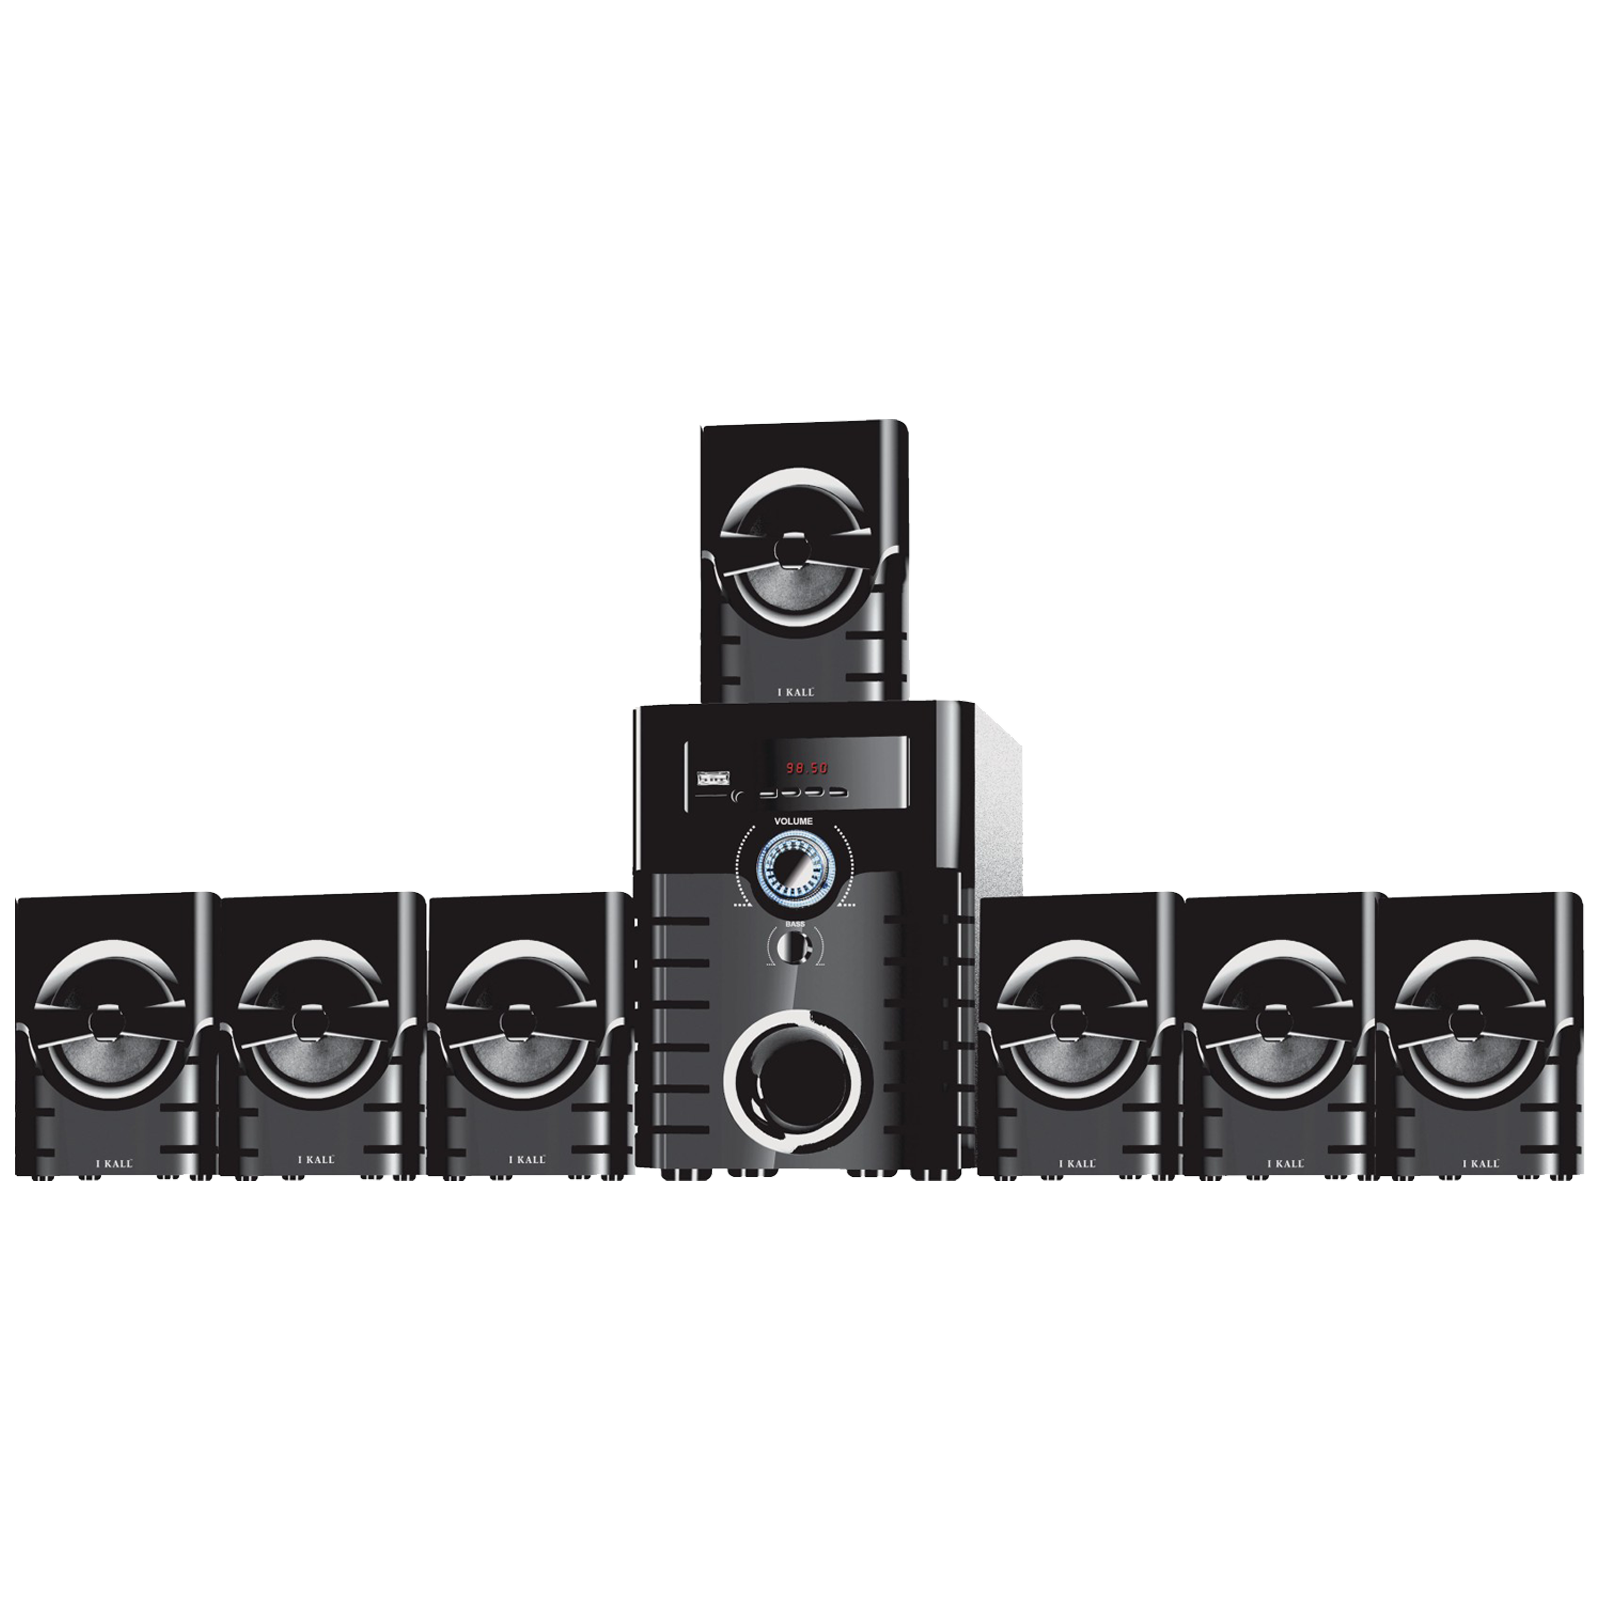 I KALL 7.1 Mono Channel Multimedia Home Theatre System (Bluetooth Support, IK-6666, Black)_1